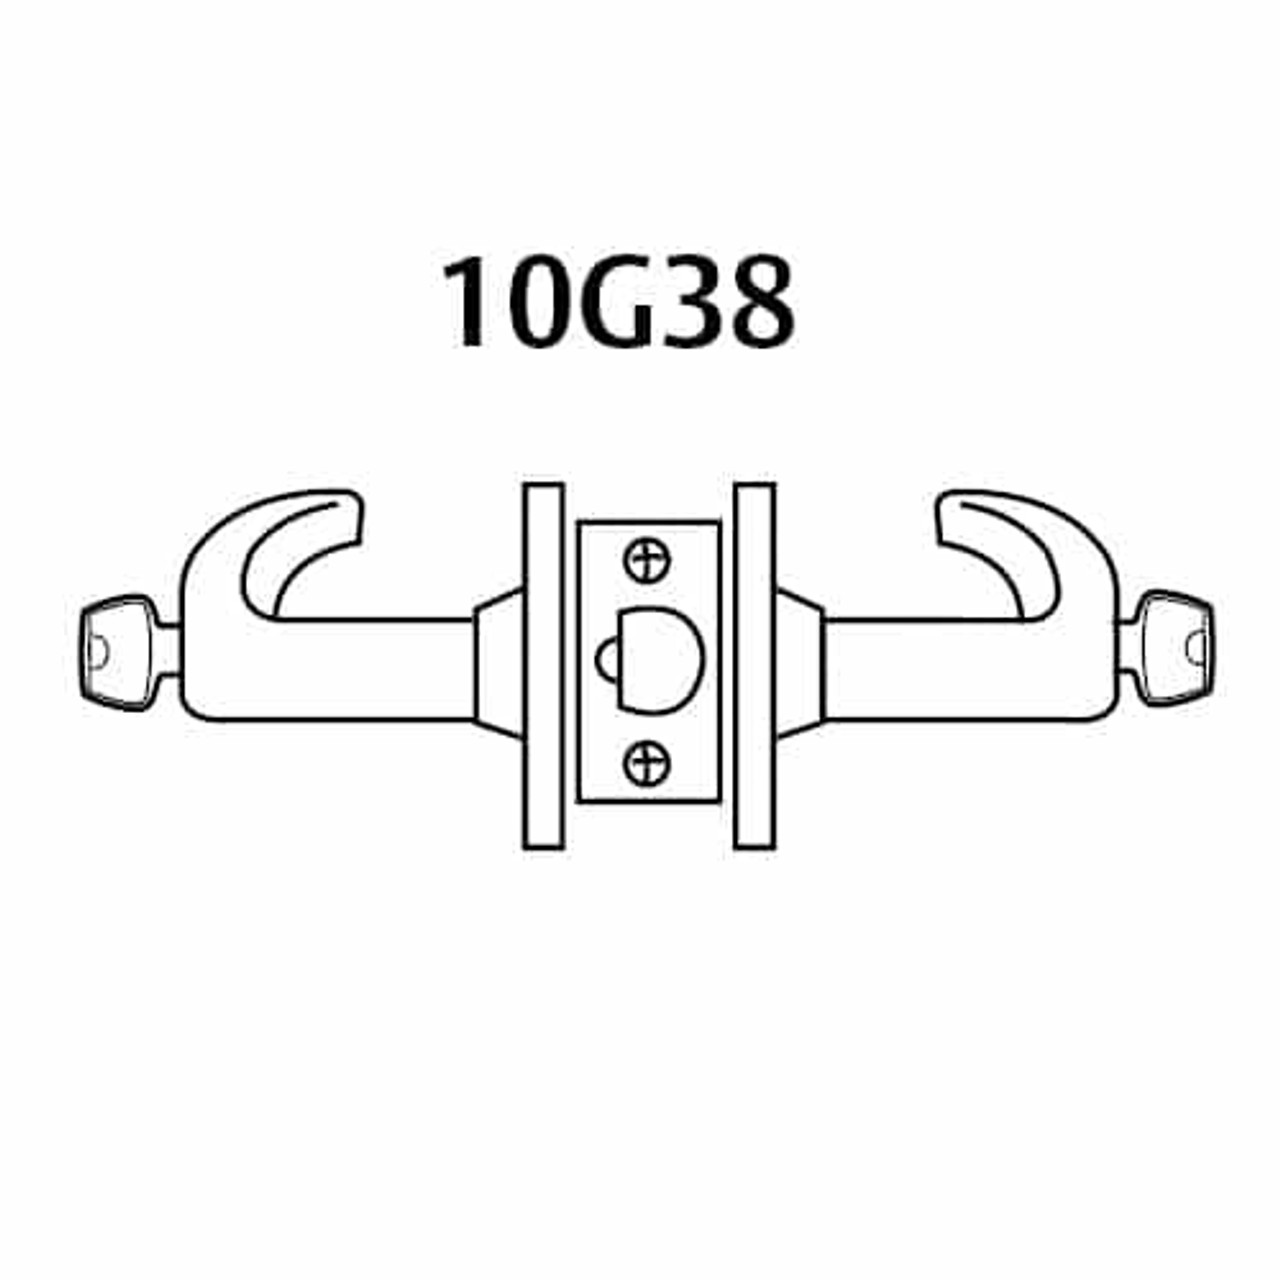 2860-10G38-LB-26D Sargent 10 Line Cylindrical Classroom Locks with B Lever Design and L Rose Prepped for LFIC in Satin Chrome